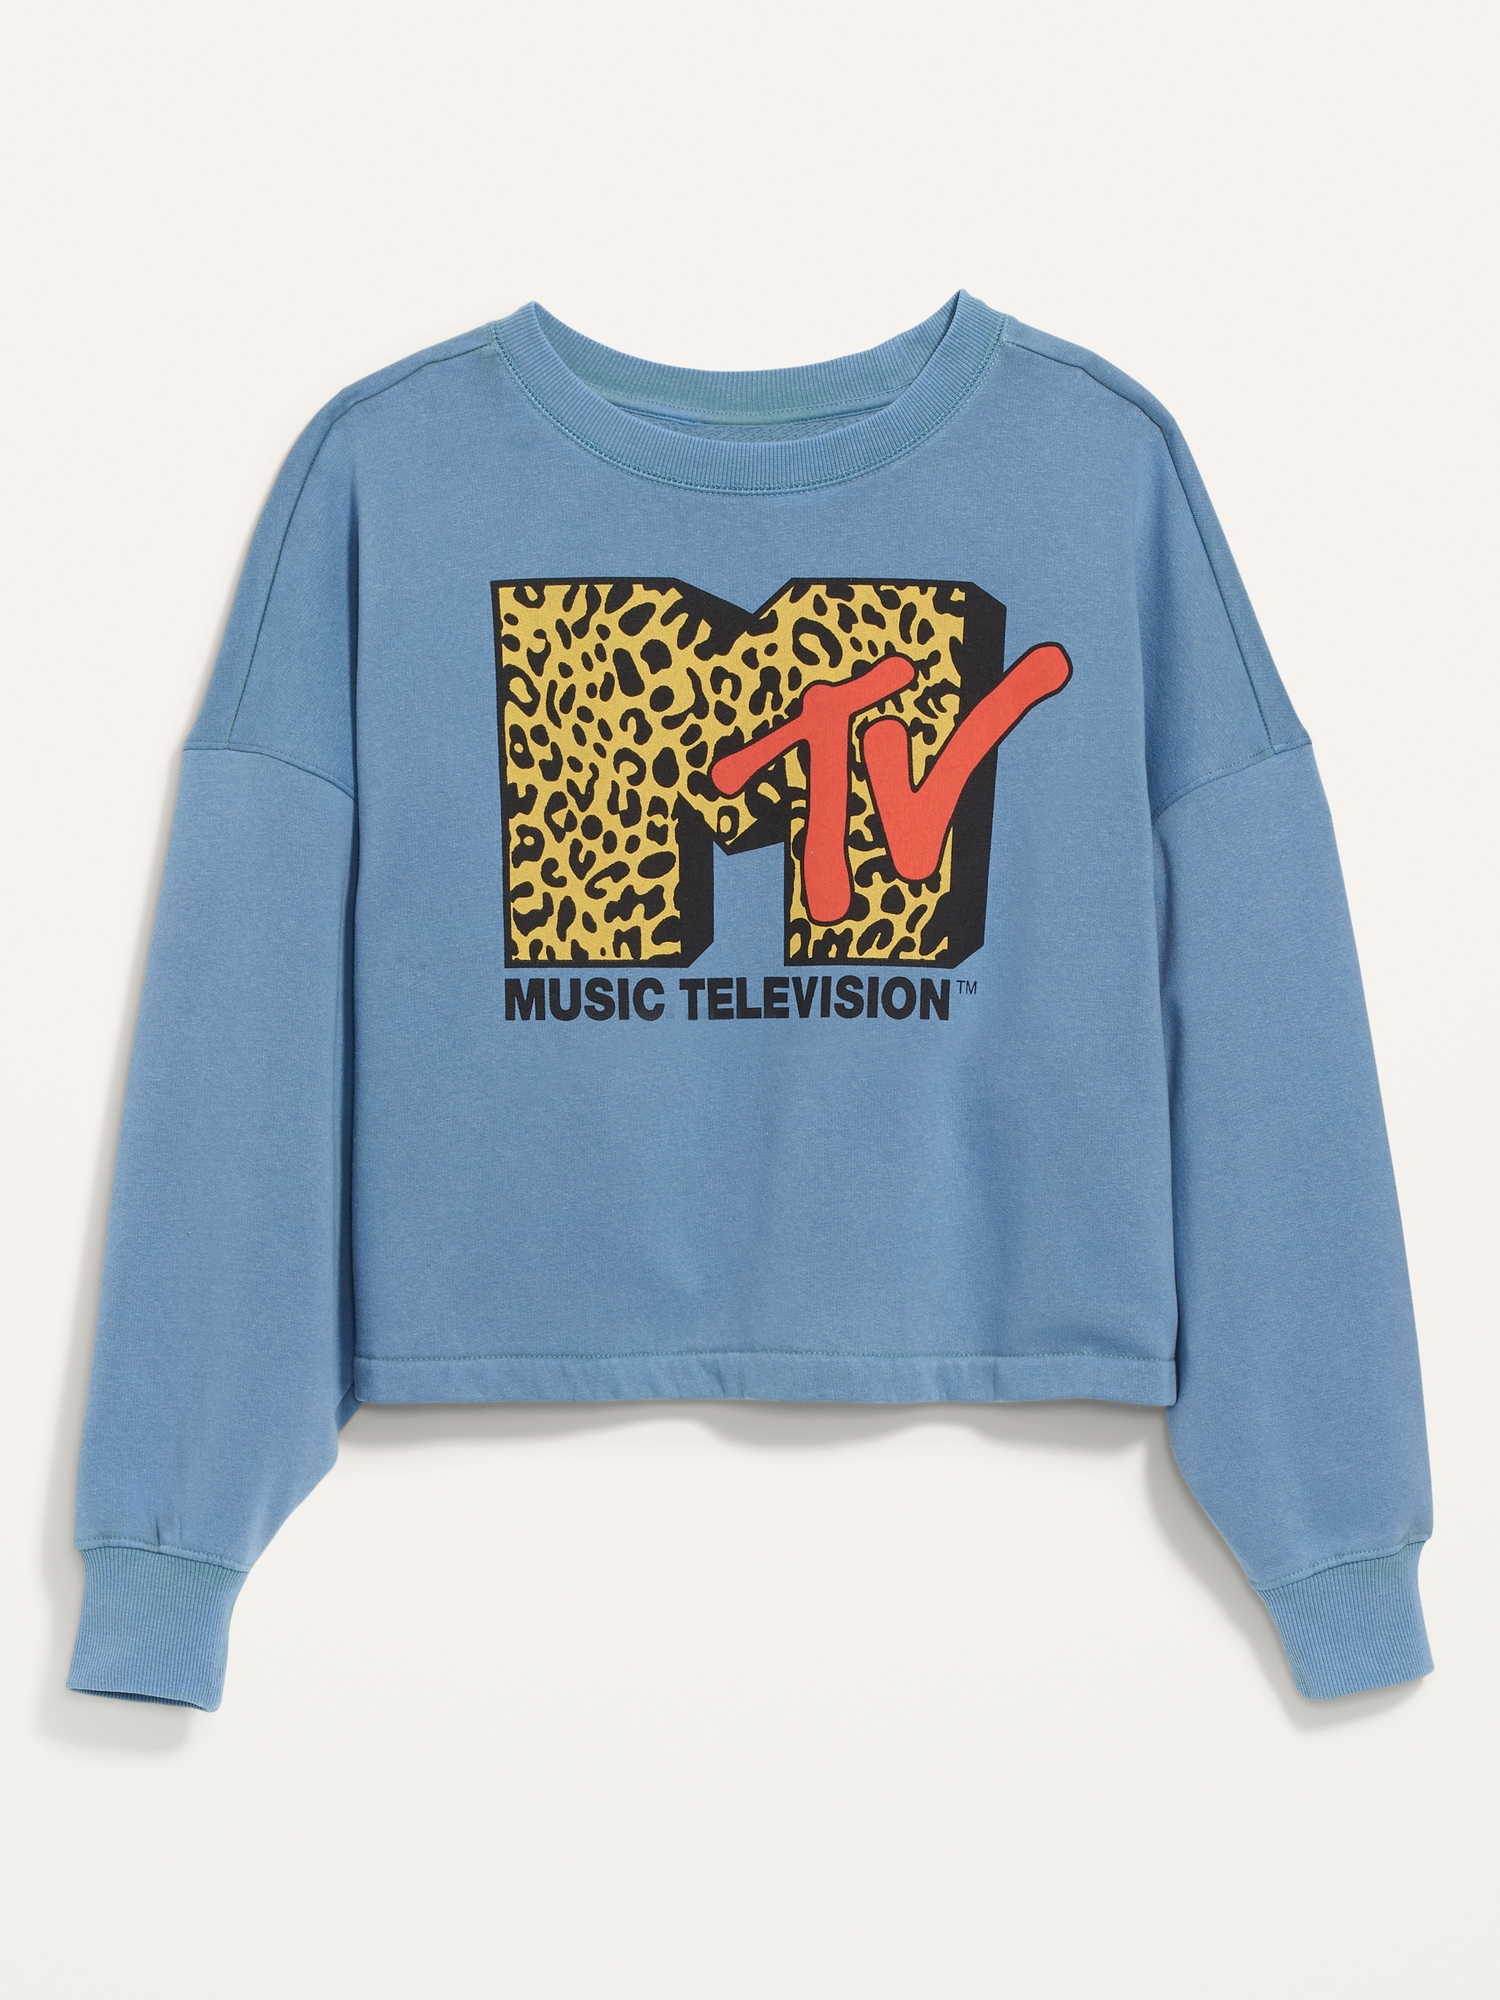 Long-Sleeve Oversized Cropped Pop-Culture Graphic Sweatshirt for